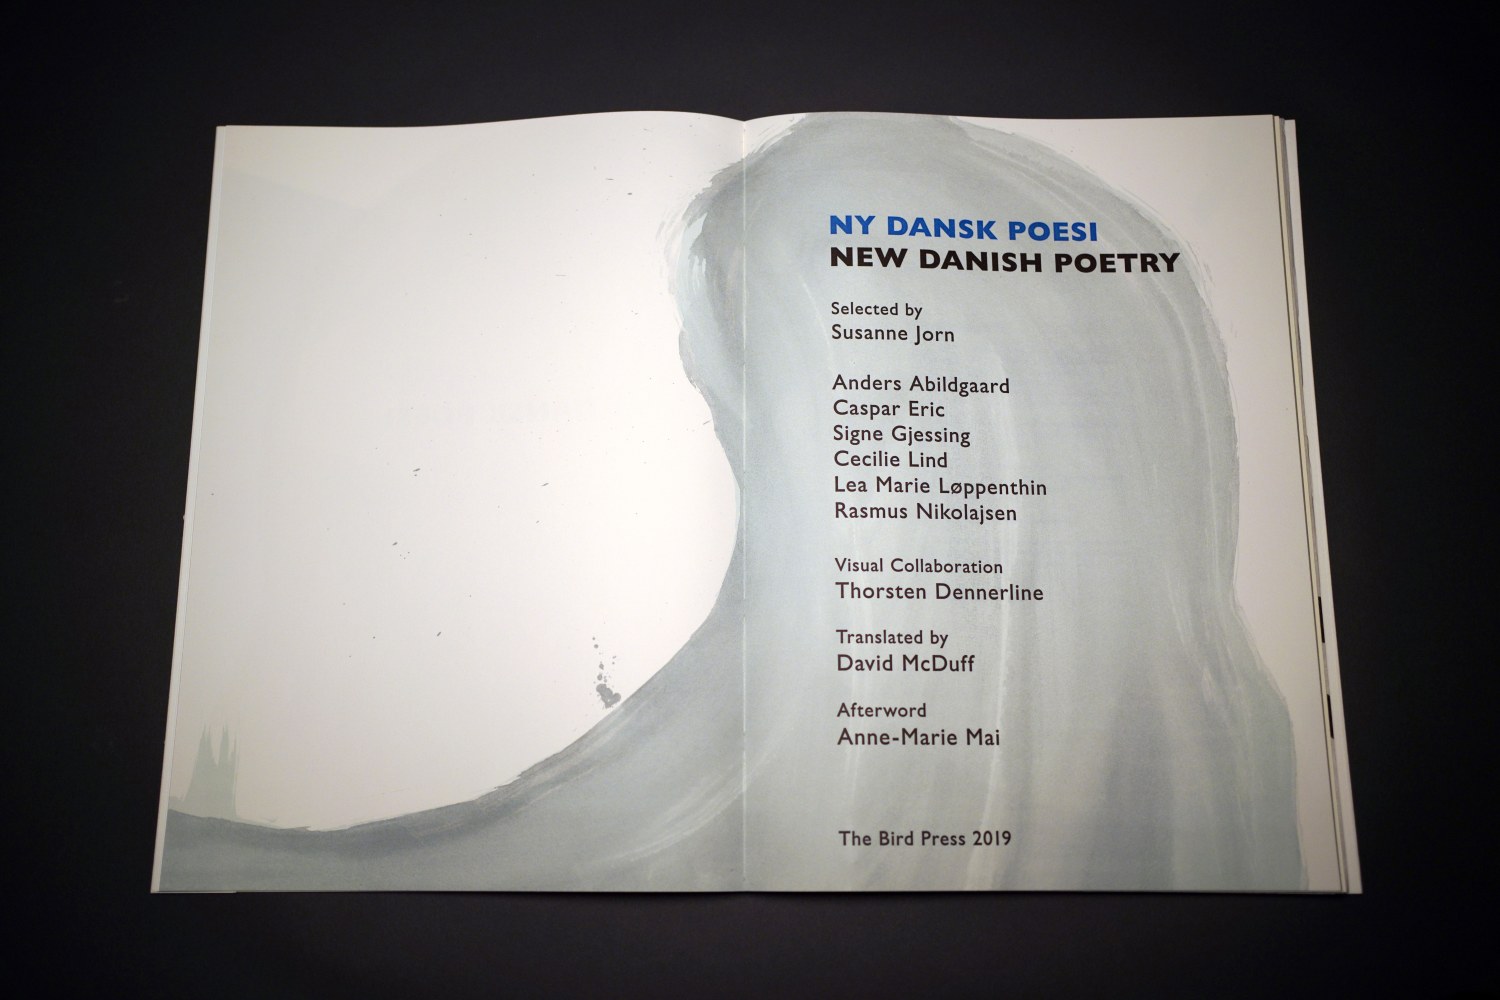 New Danish Poetry/Ny dansk poesi
Anders Abildgaard, Caspar Eric, Signe Gjessing, Cecilie Lind, Lea Marie&amp;nbsp; L&amp;oslash;ppenthin, Rasmus Nikolajsen, Susanne Jorn, Anne-Marie Mai, David&amp;nbsp; McDuff, and Thorsten Dennerline, 2019-2020

Stone, plate and offset lithography, metal and polymer letterpress,&amp;nbsp; woodcuts, handmade and machine made papers, hand bound in&amp;nbsp; handmade paper and in a slip case.&amp;nbsp;
12.75&amp;quot; x 18&amp;quot; closed, 25.5&amp;quot; x 18&amp;quot;&amp;nbsp;open
Edition: 30, plus 10 special copies
Discounted EAB FAIR Price: $4600, limited individual prints also available

Published by The Bird Press

INQUIRE